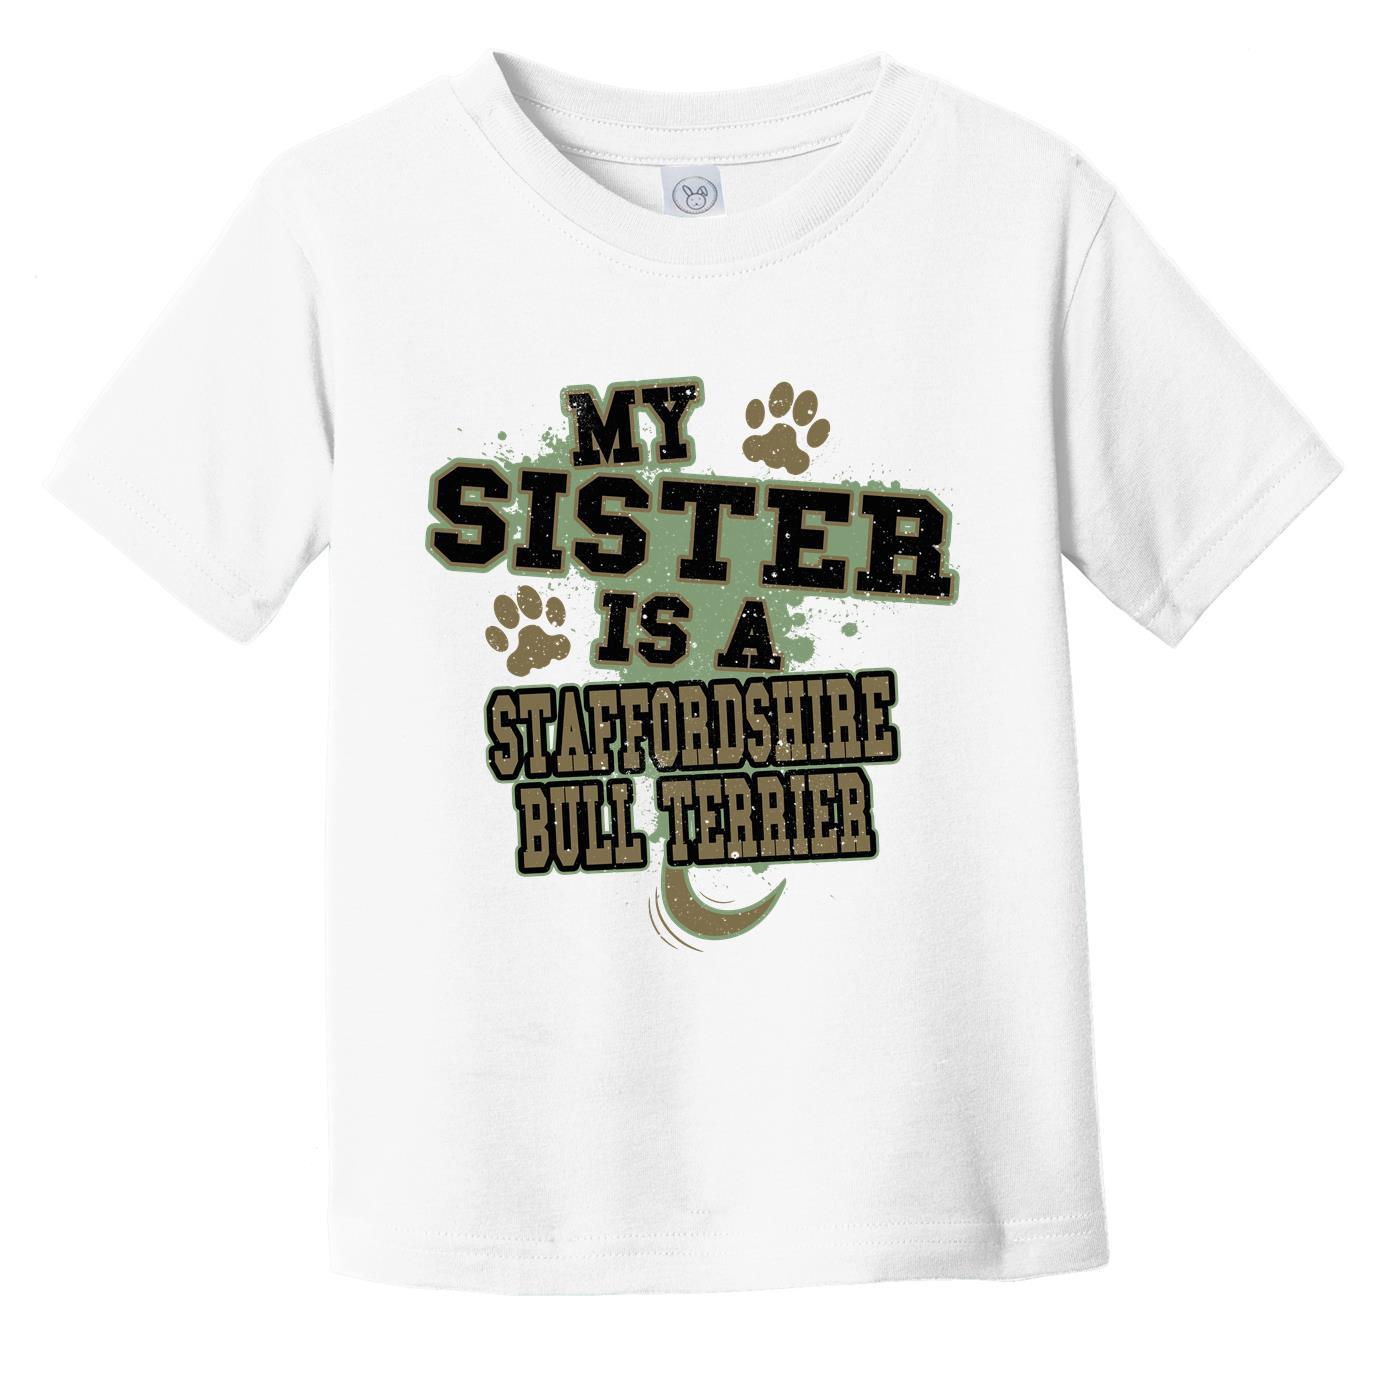 My Sister Is A Staffordshire Bull Terrier Funny Dog Infant Toddler T-Shirt